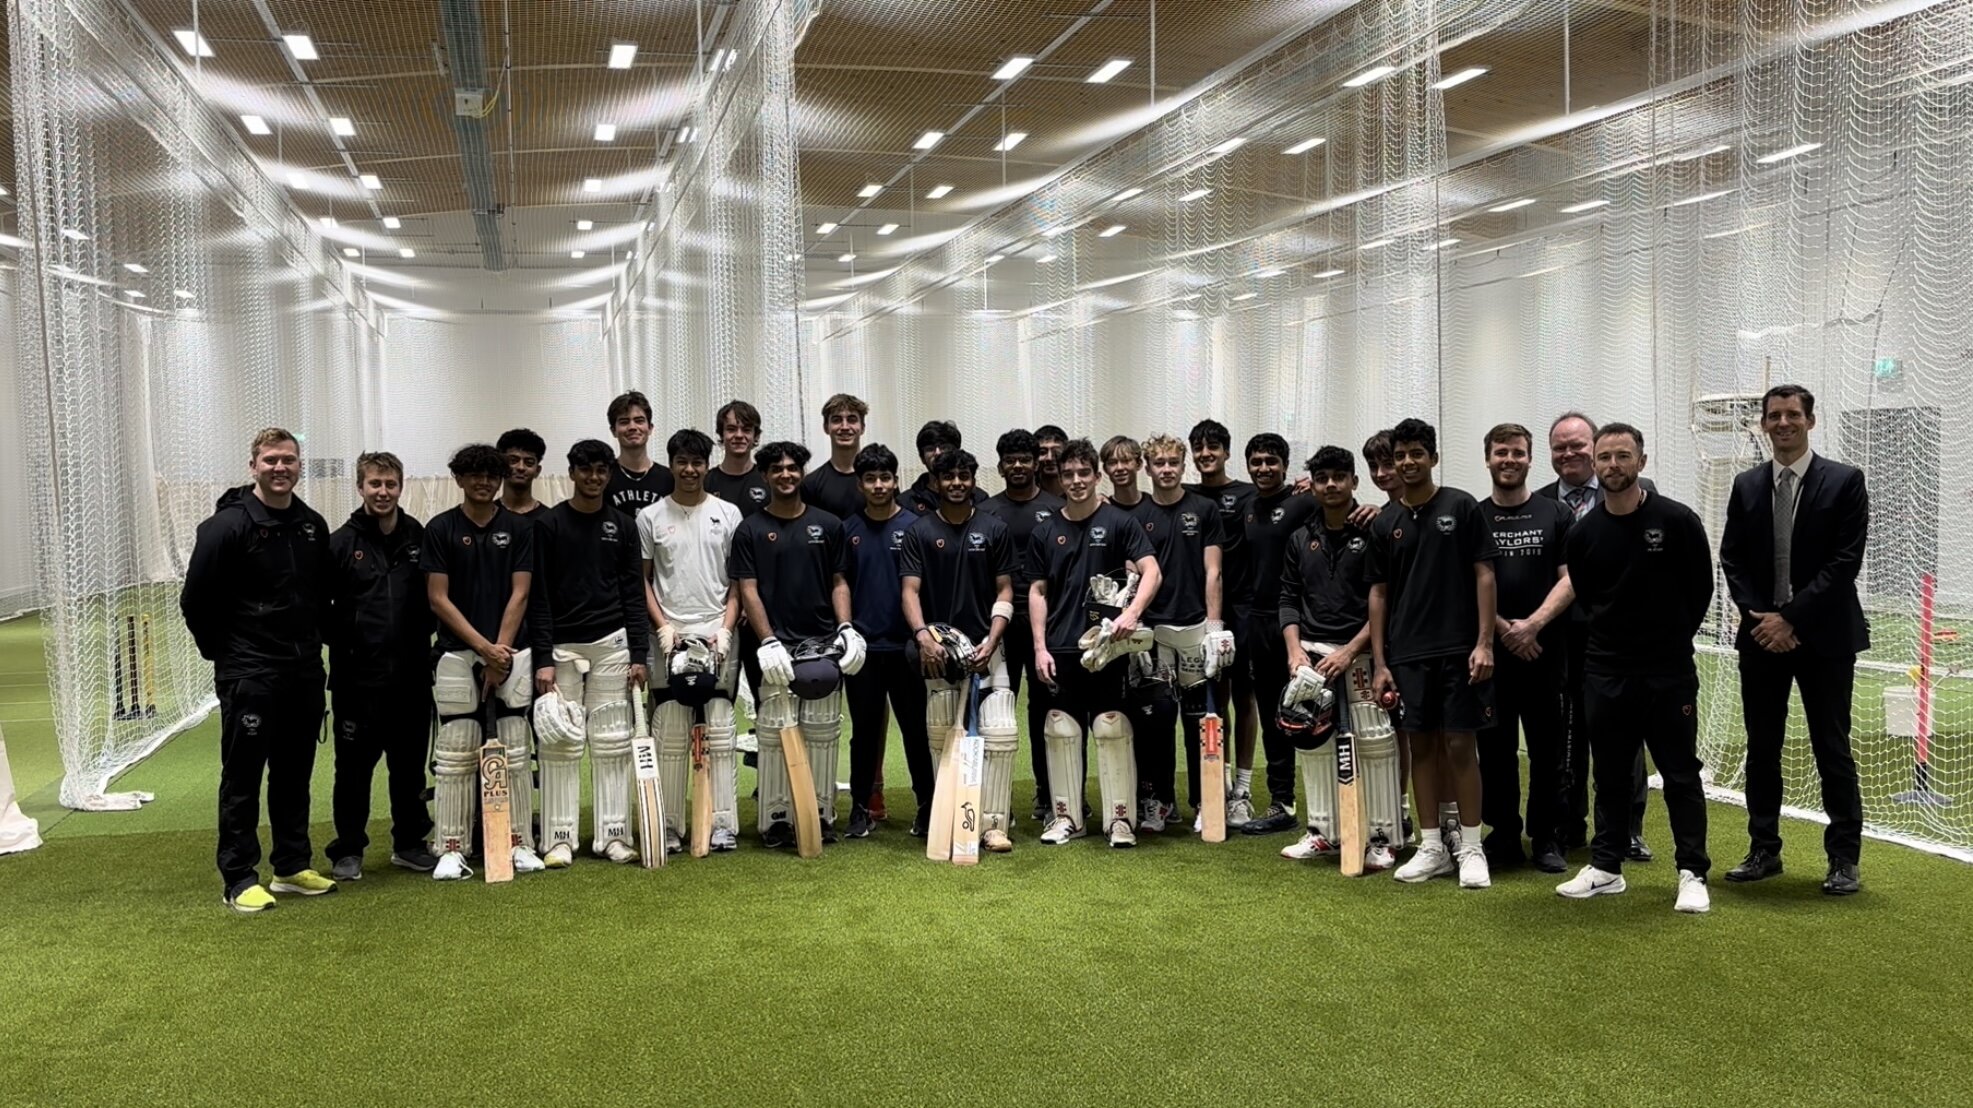 Cricketers pose for a group picture in a cricket training centre